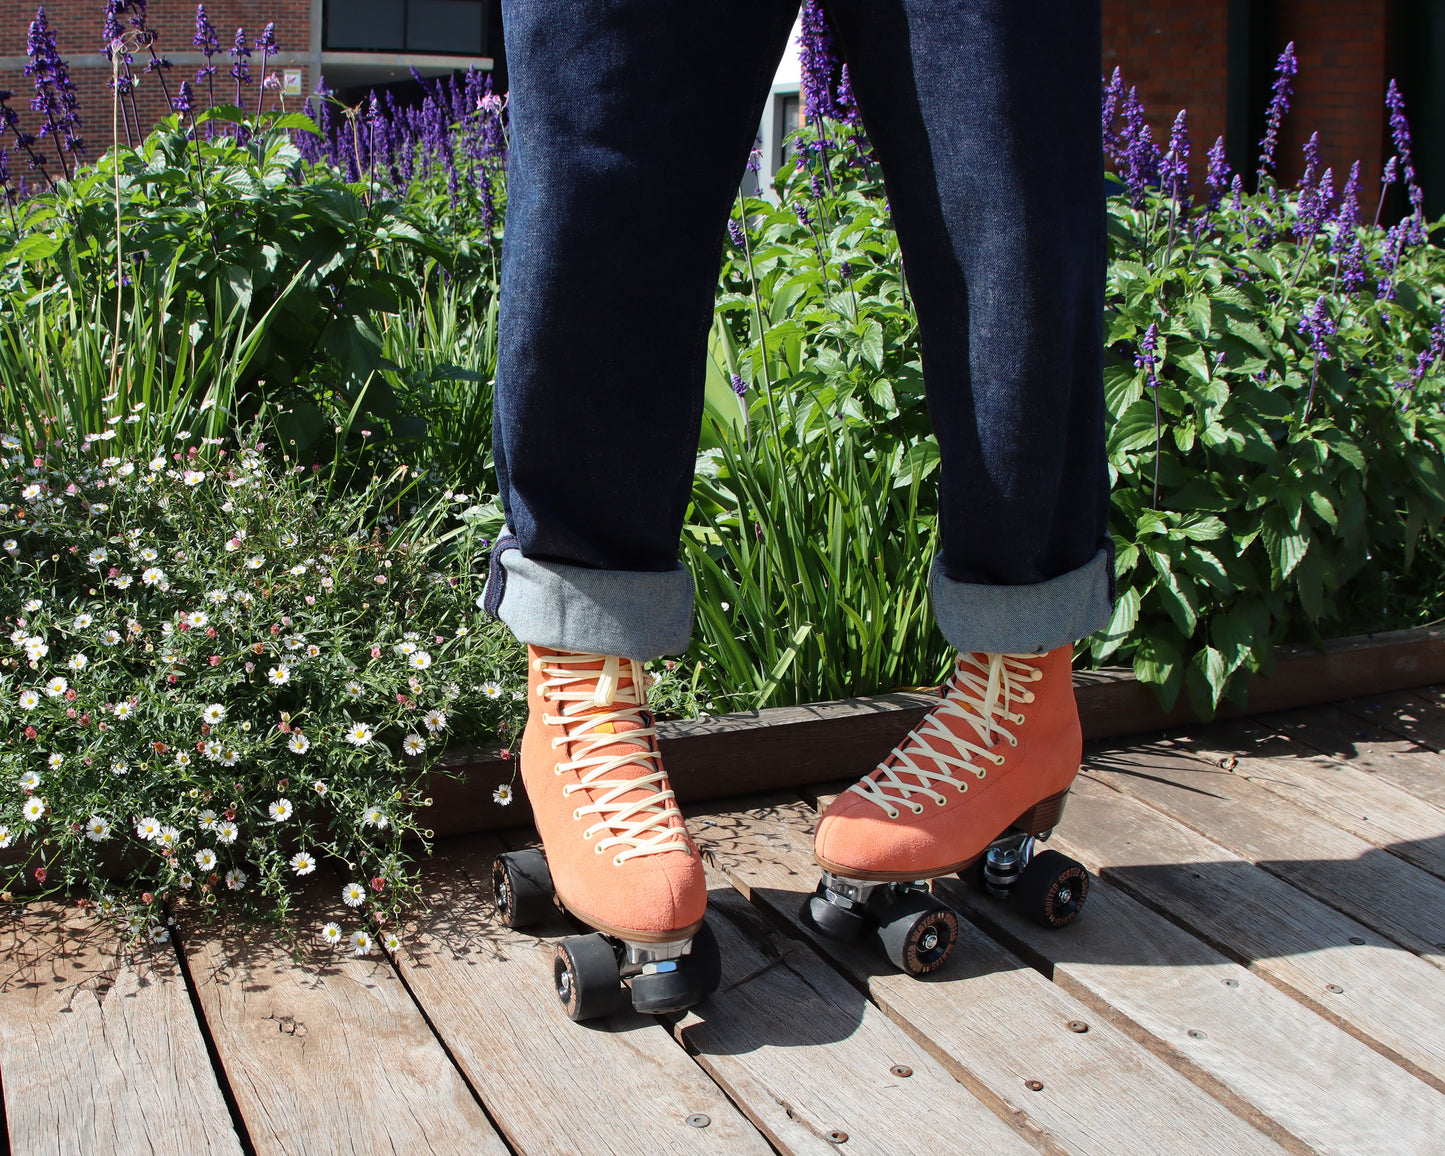 Chuffed Skates peach pink roller skates on boardwalk with lavender flowers behind